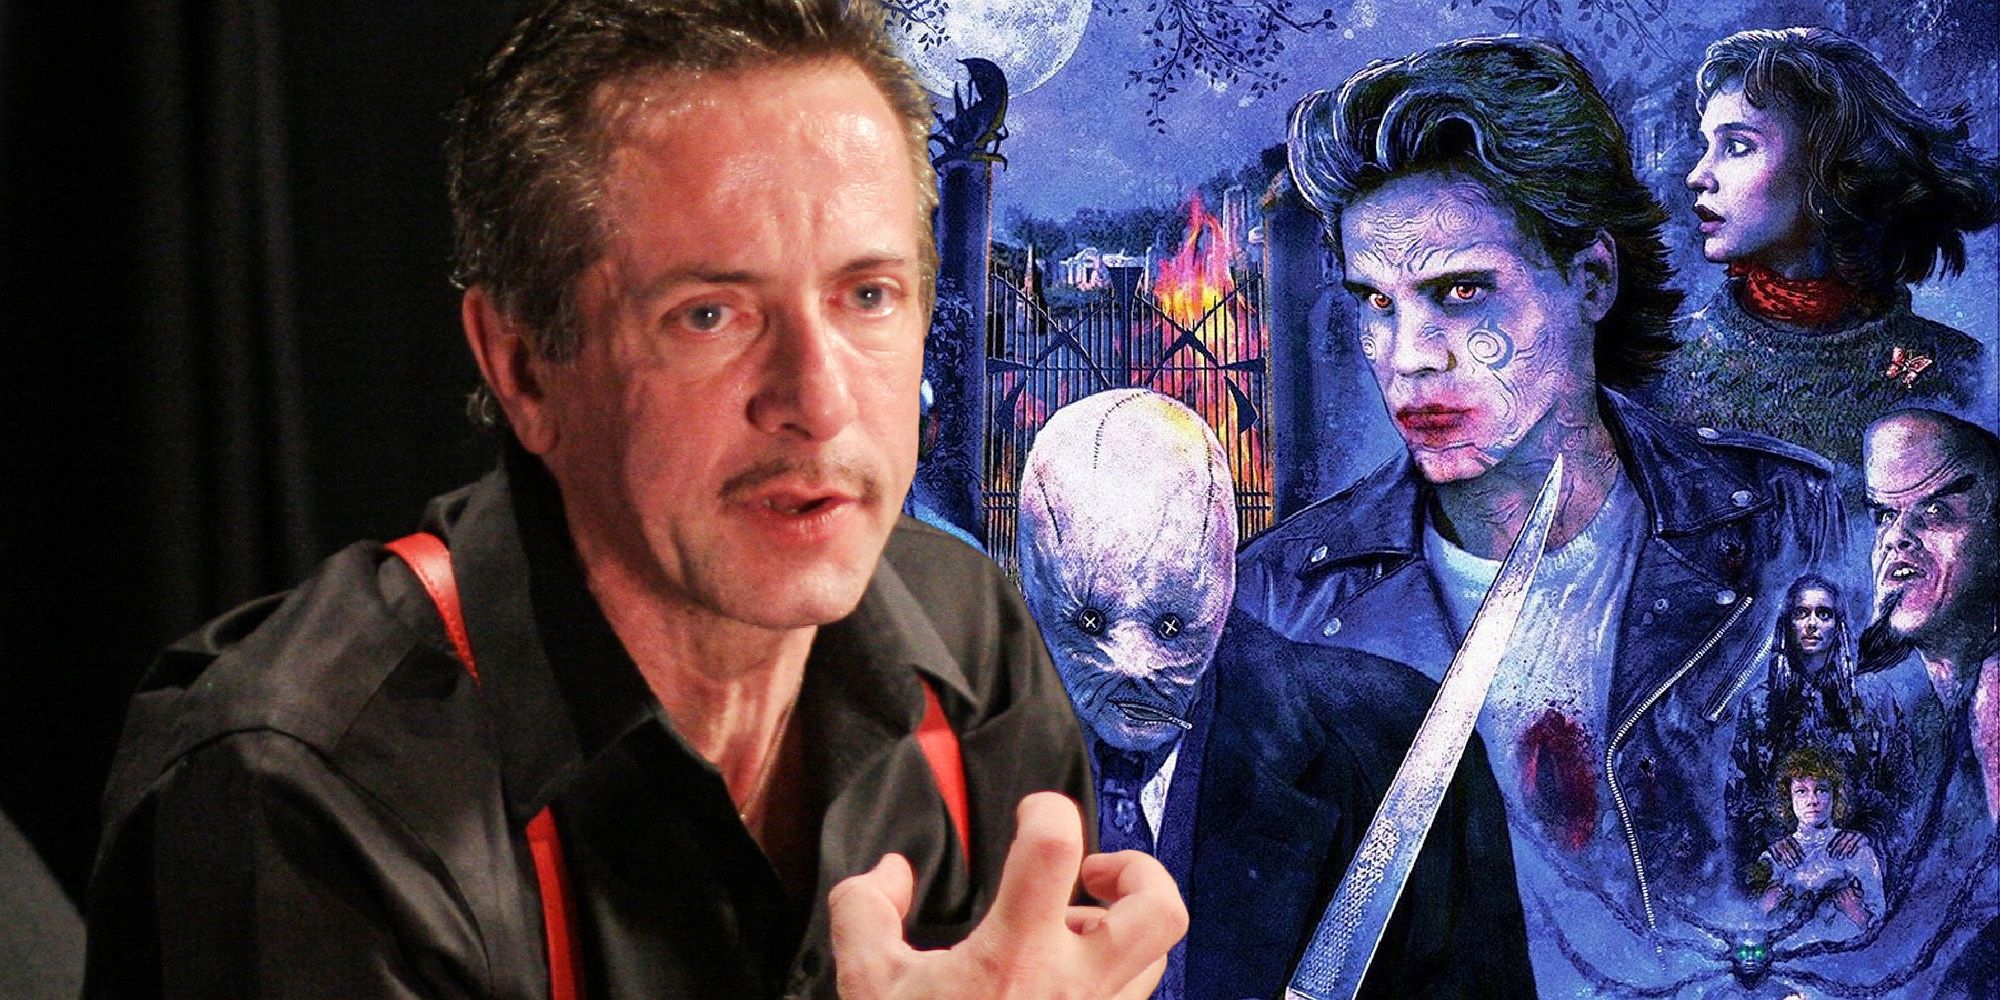 A image of Clive Barker is overlaid over artwork from the Nightbreed franchise.